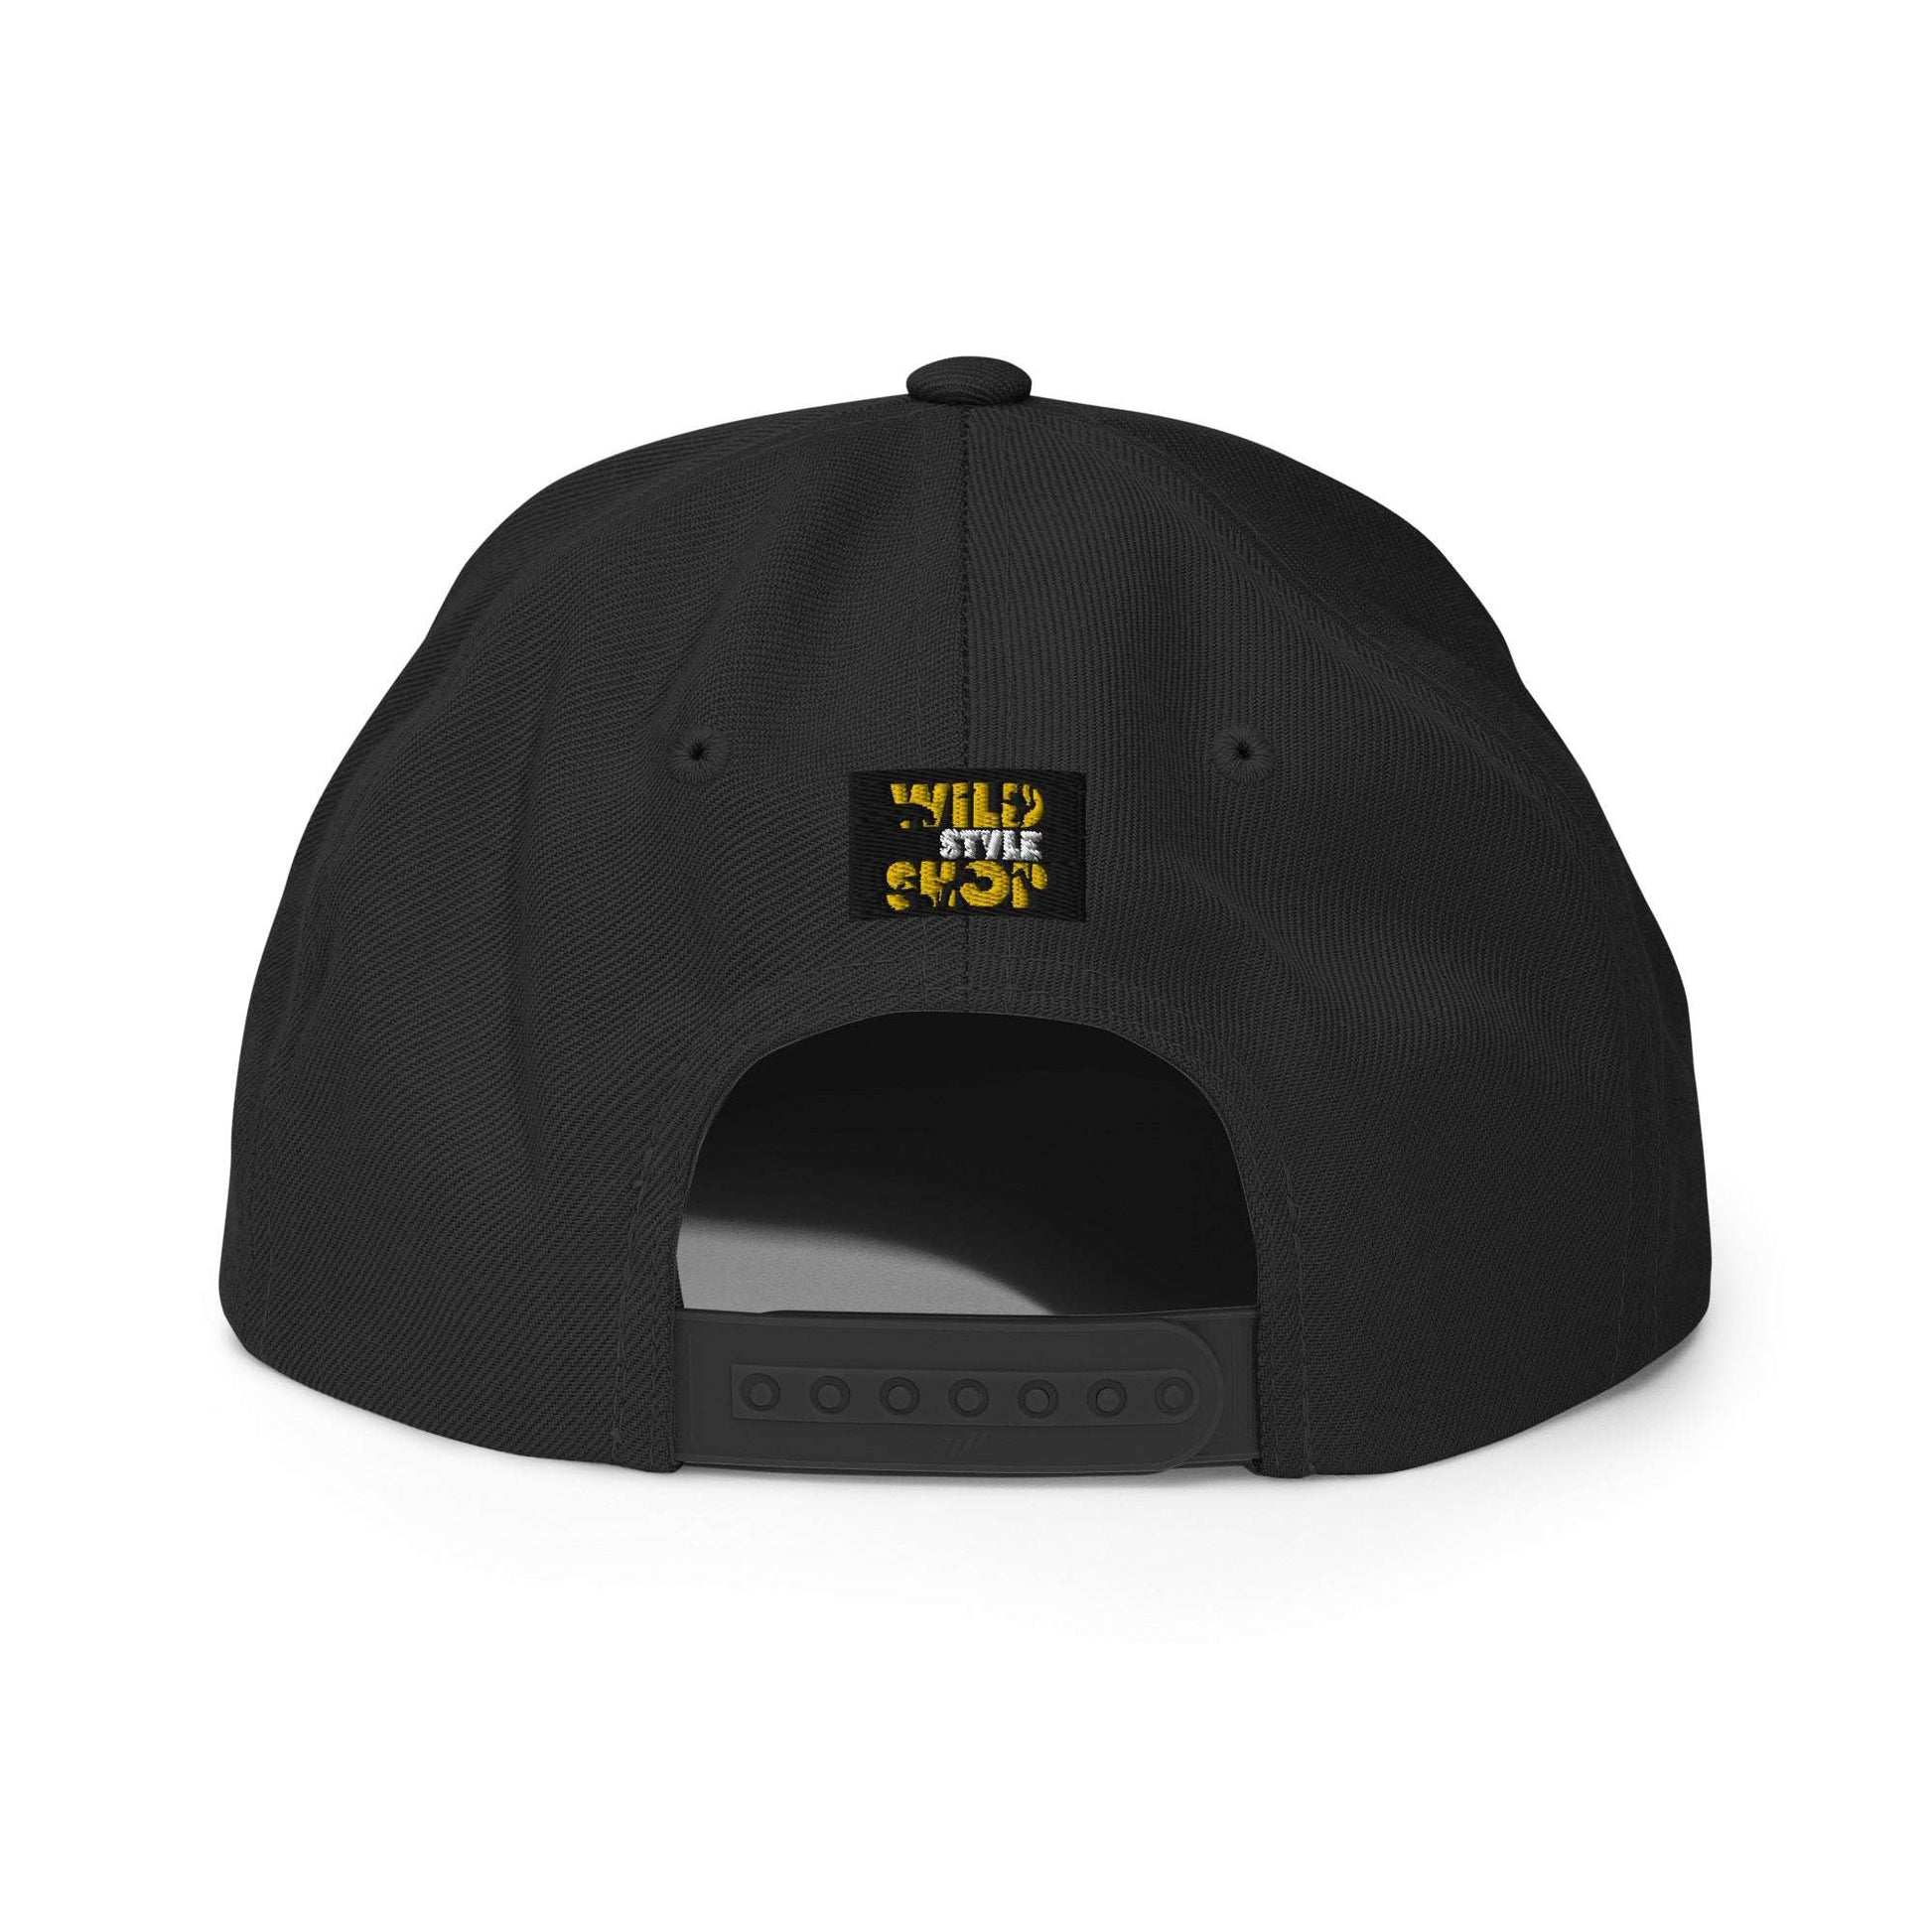 Torn Up - Embroidered Snapback Hat - Wild Style Shop